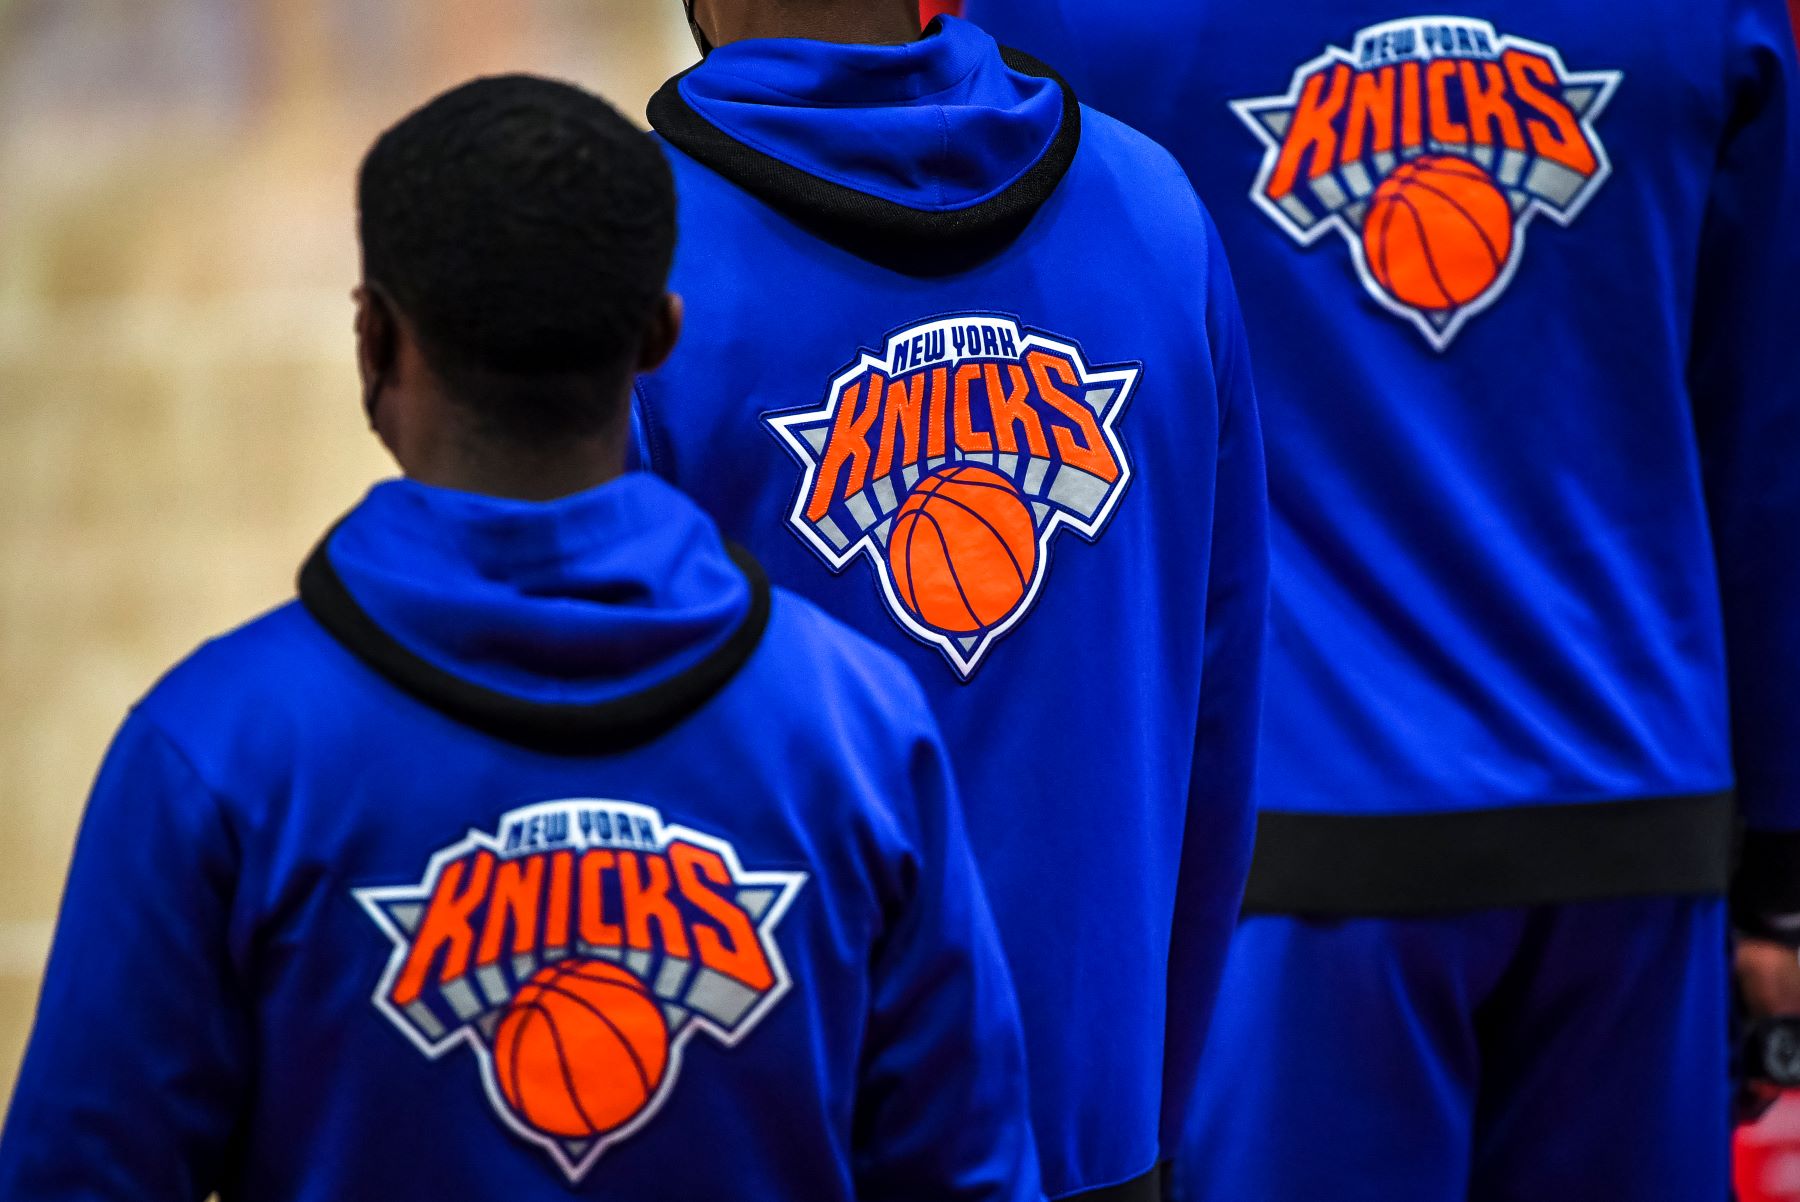 NBA team New York Knicks logo on the back of hoodies before a game against the Detroit Pistons